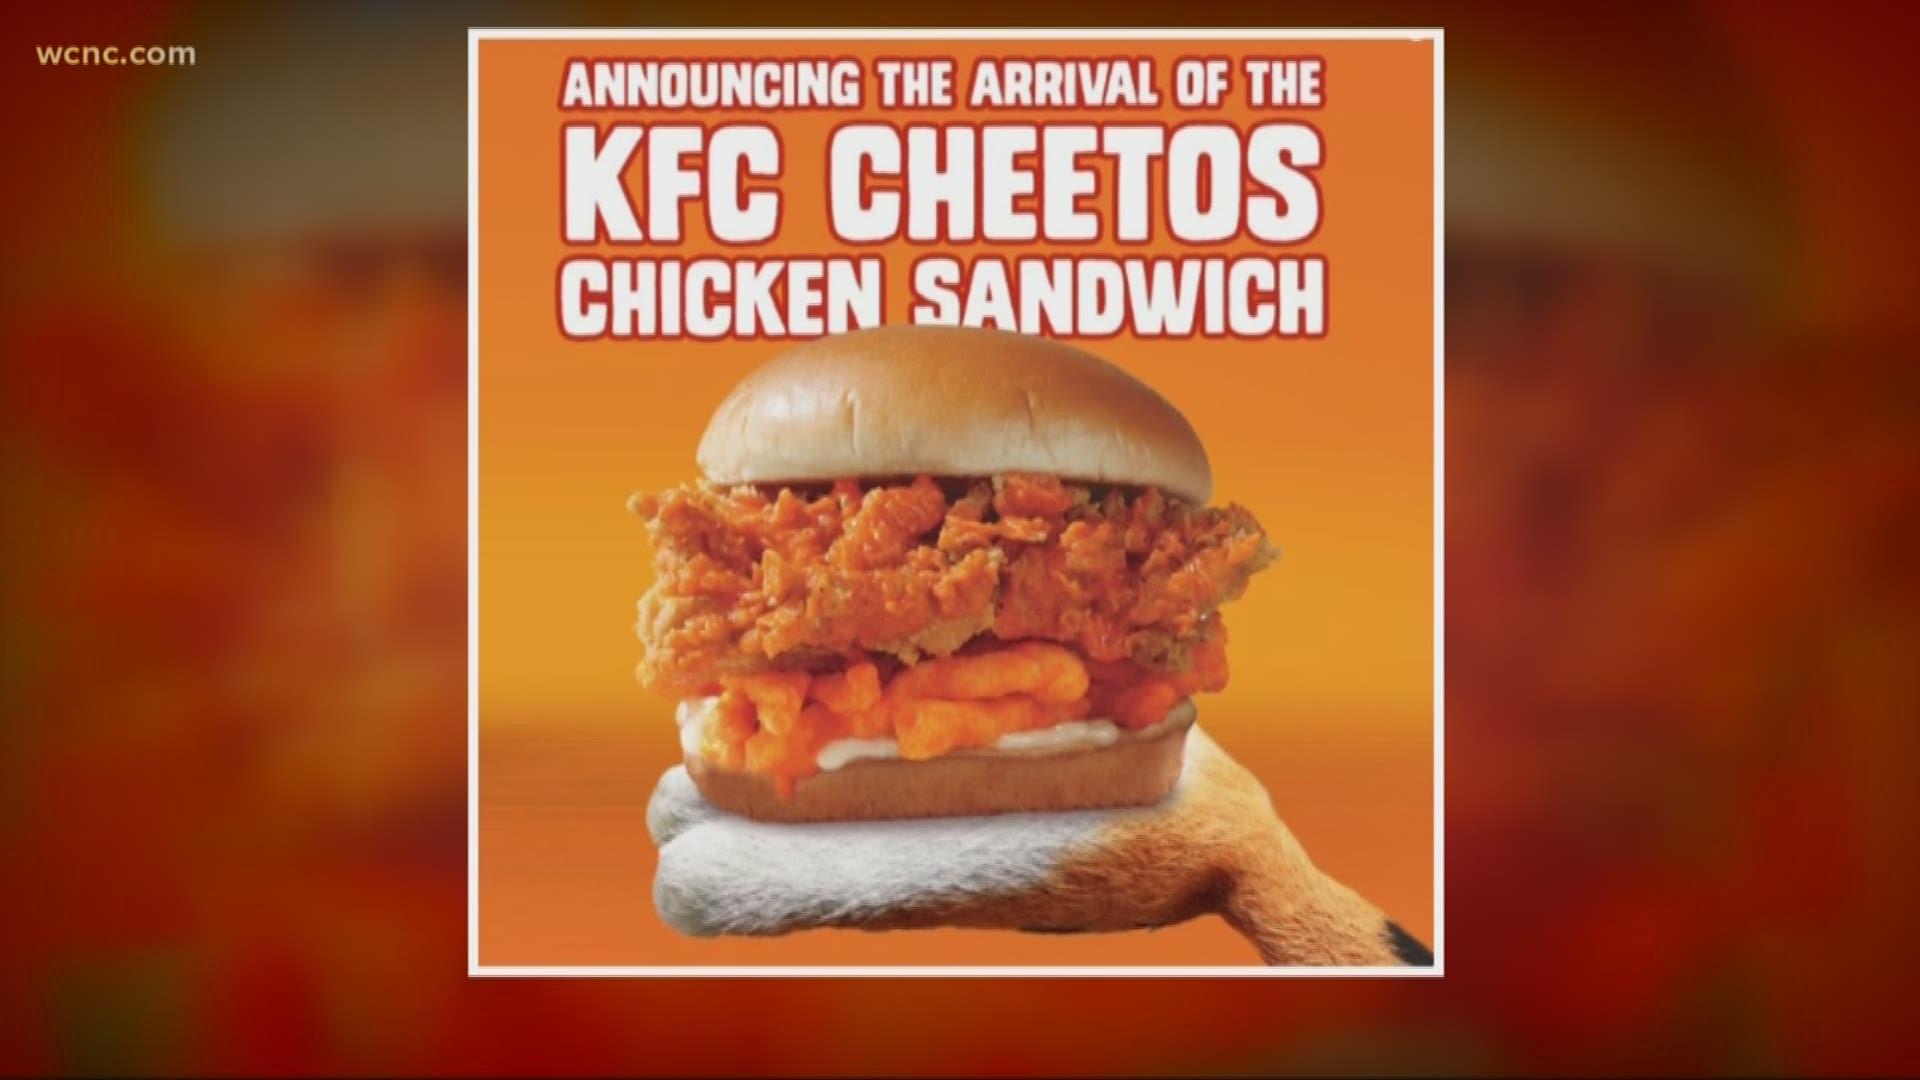 The Colonel is back with another unique recipe. It's the Cheeto Chicken Sandwich, and features chicken with a layer of cheetos, mayo and "cheeto sauce."